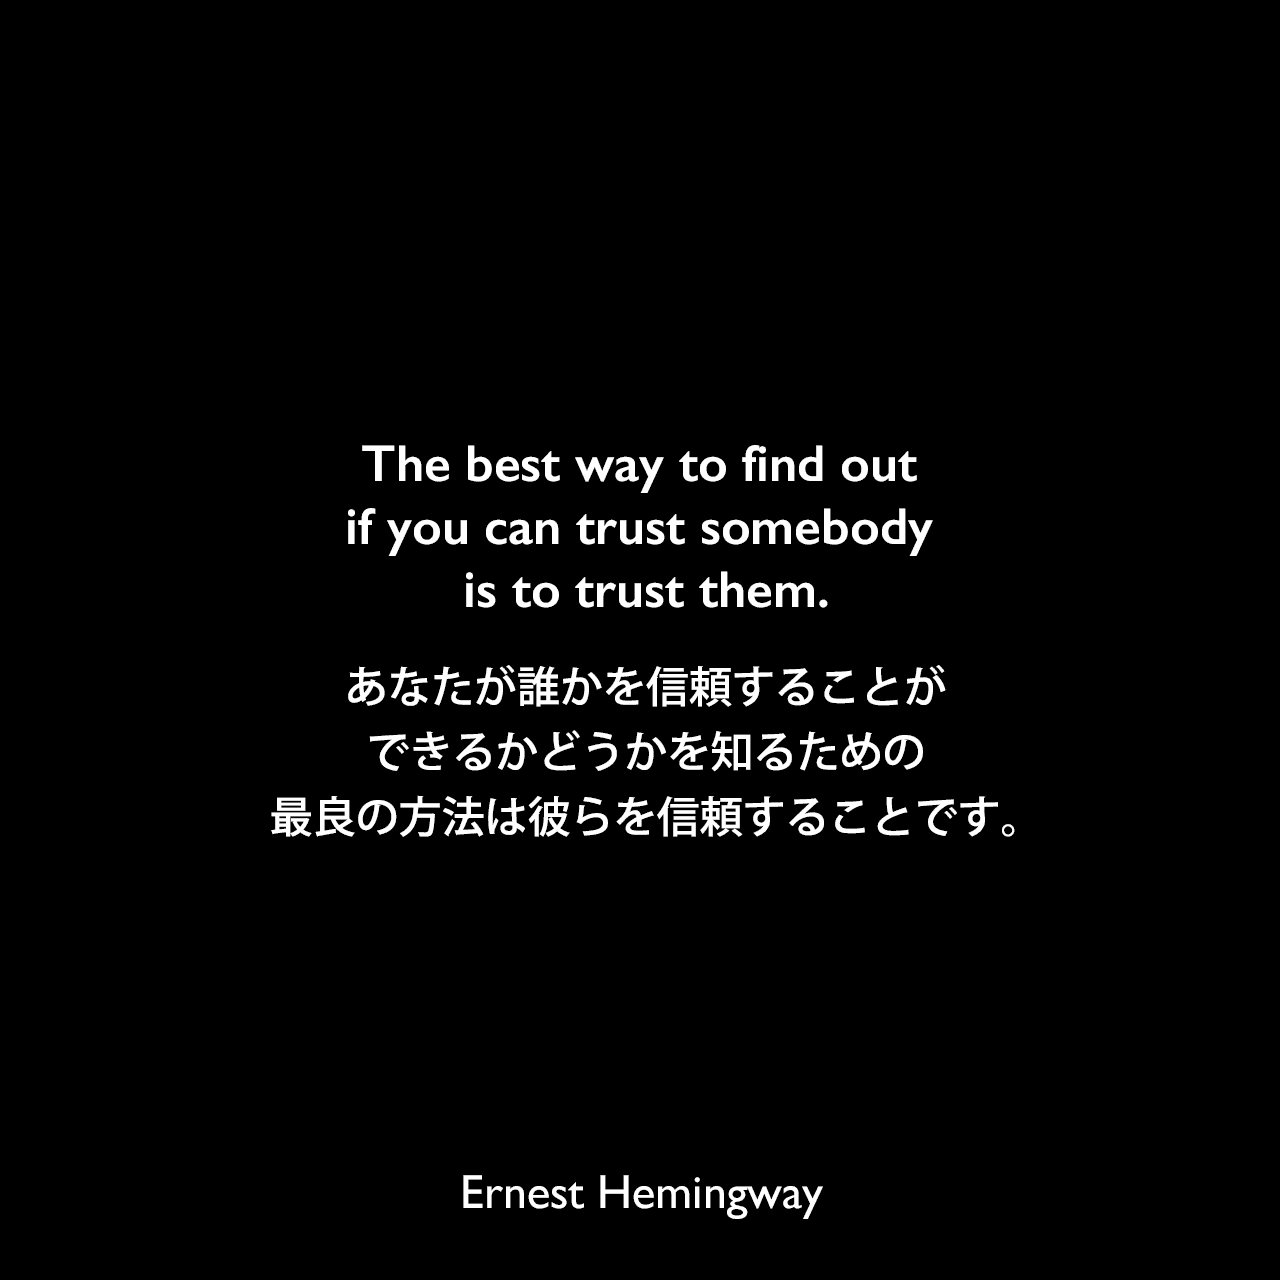 The best way to find out if you can trust somebody is to trust them.あなたが、誰かを信頼することができるかどうかを知るための、最良の方法は彼らを信頼することです。Ernest Hemingway